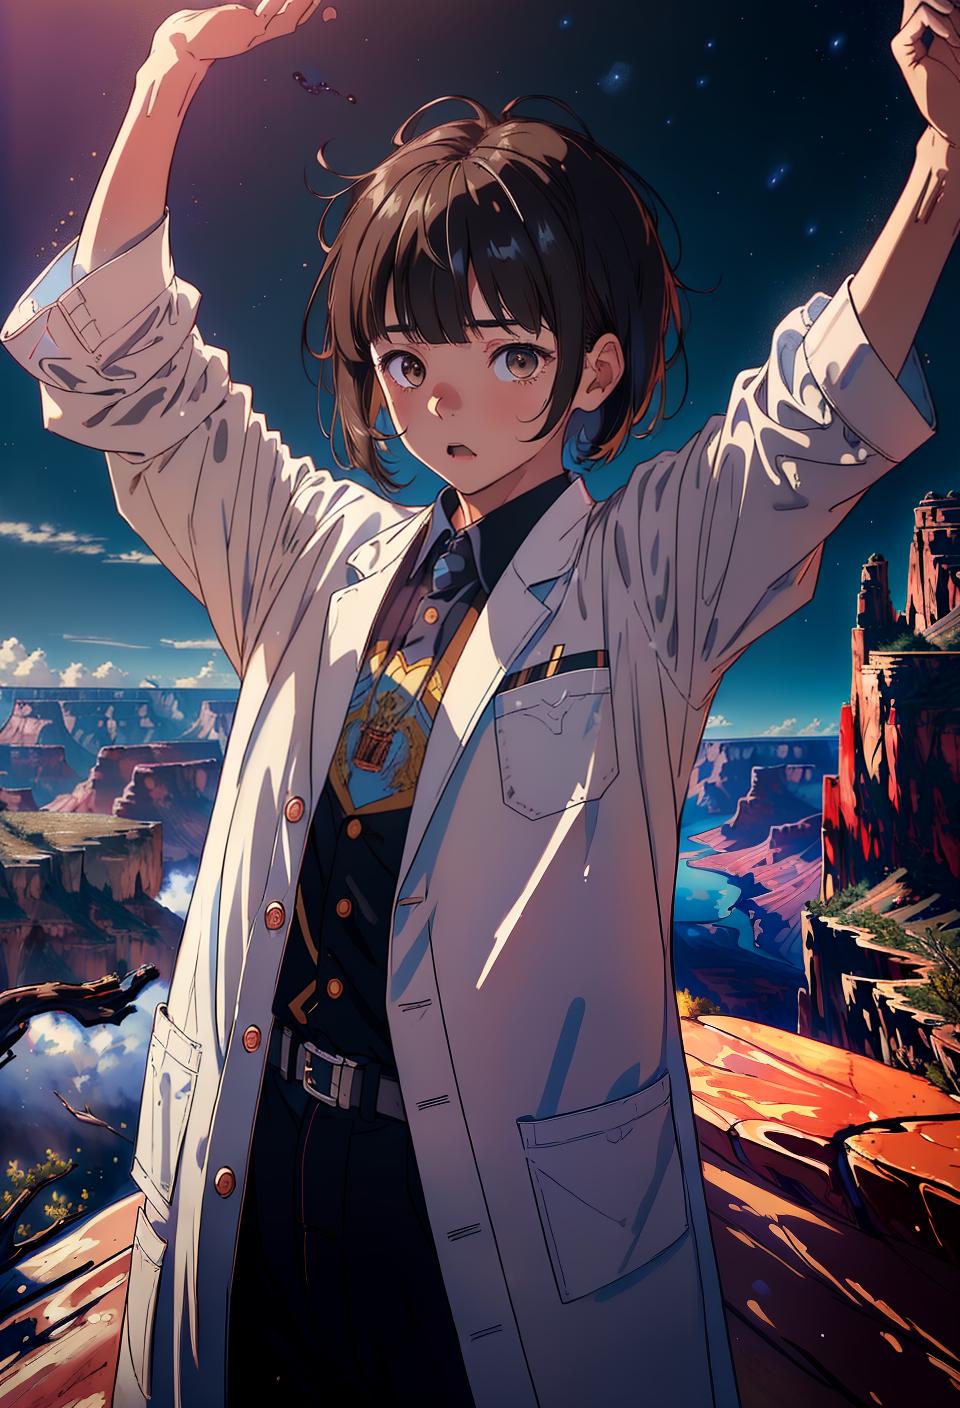  ((trending, highres, masterpiece, cinematic shot)), 1boy, young, male lab coat, Grand Canyon scene, medium-length straight brown hair, blunt bangs, large amber eyes, lazy personality, sleepy expression, fair skin, lively, limber